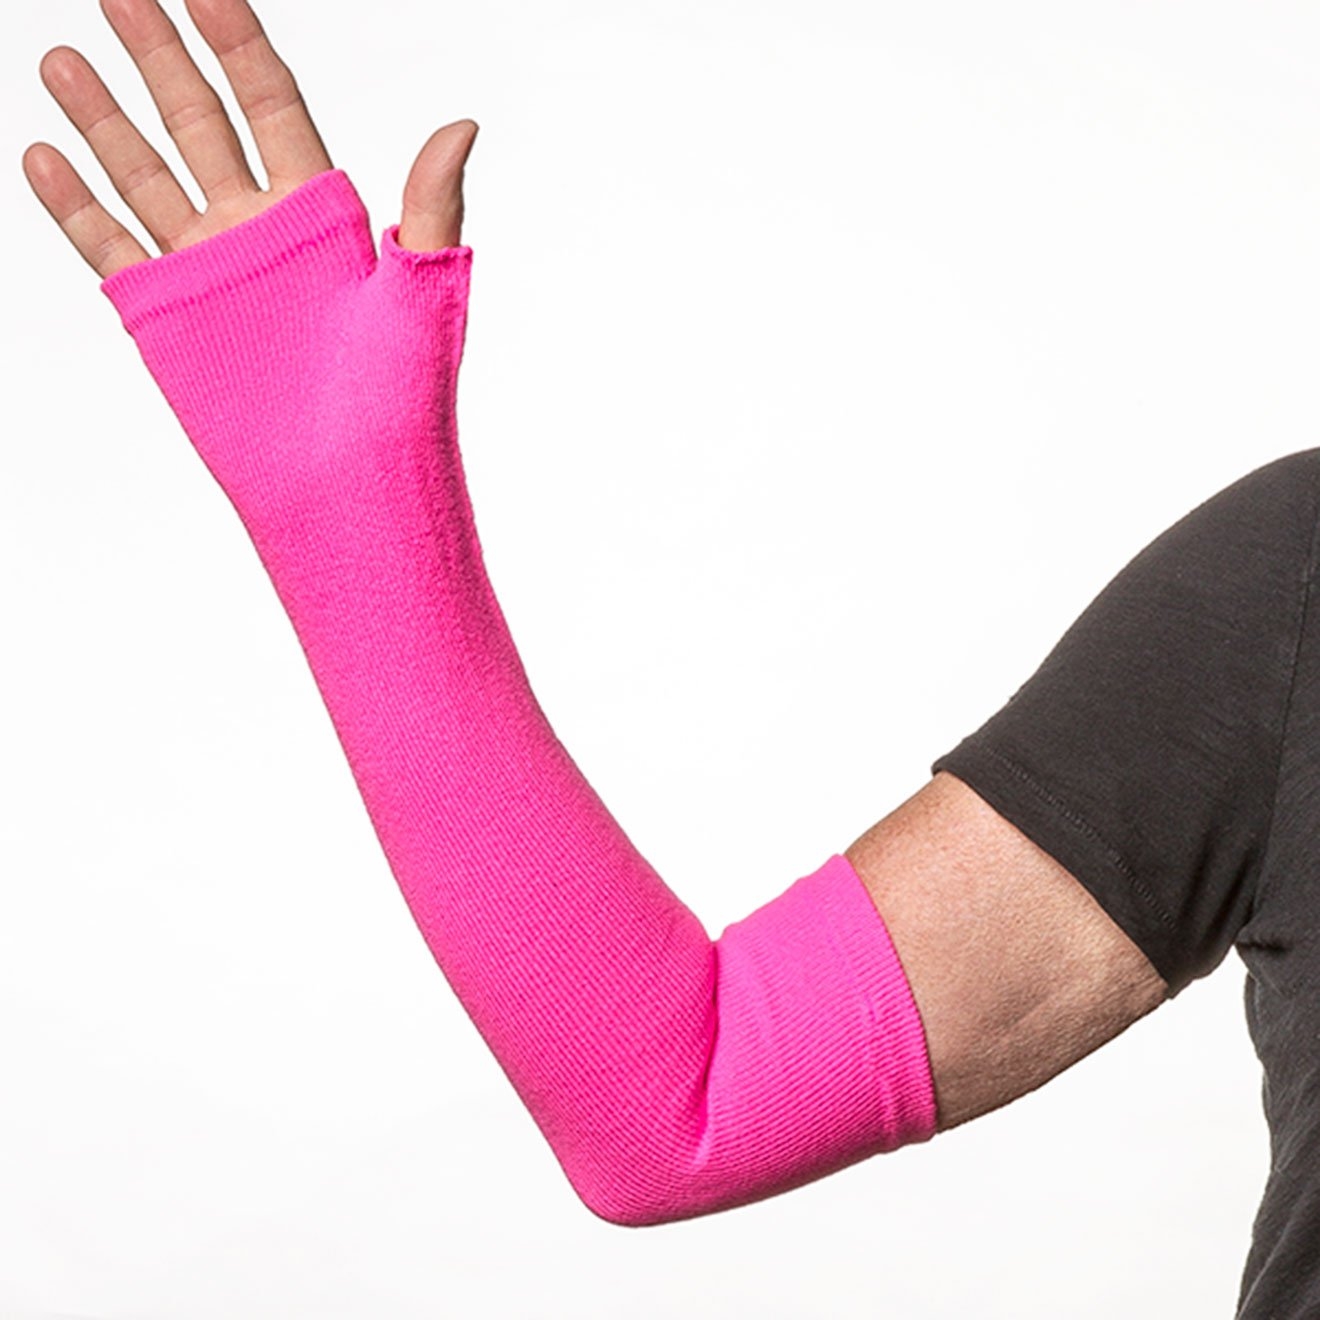 Long Fingerless Gloves for fragile and weak skin protection Pink – Limb Keepers